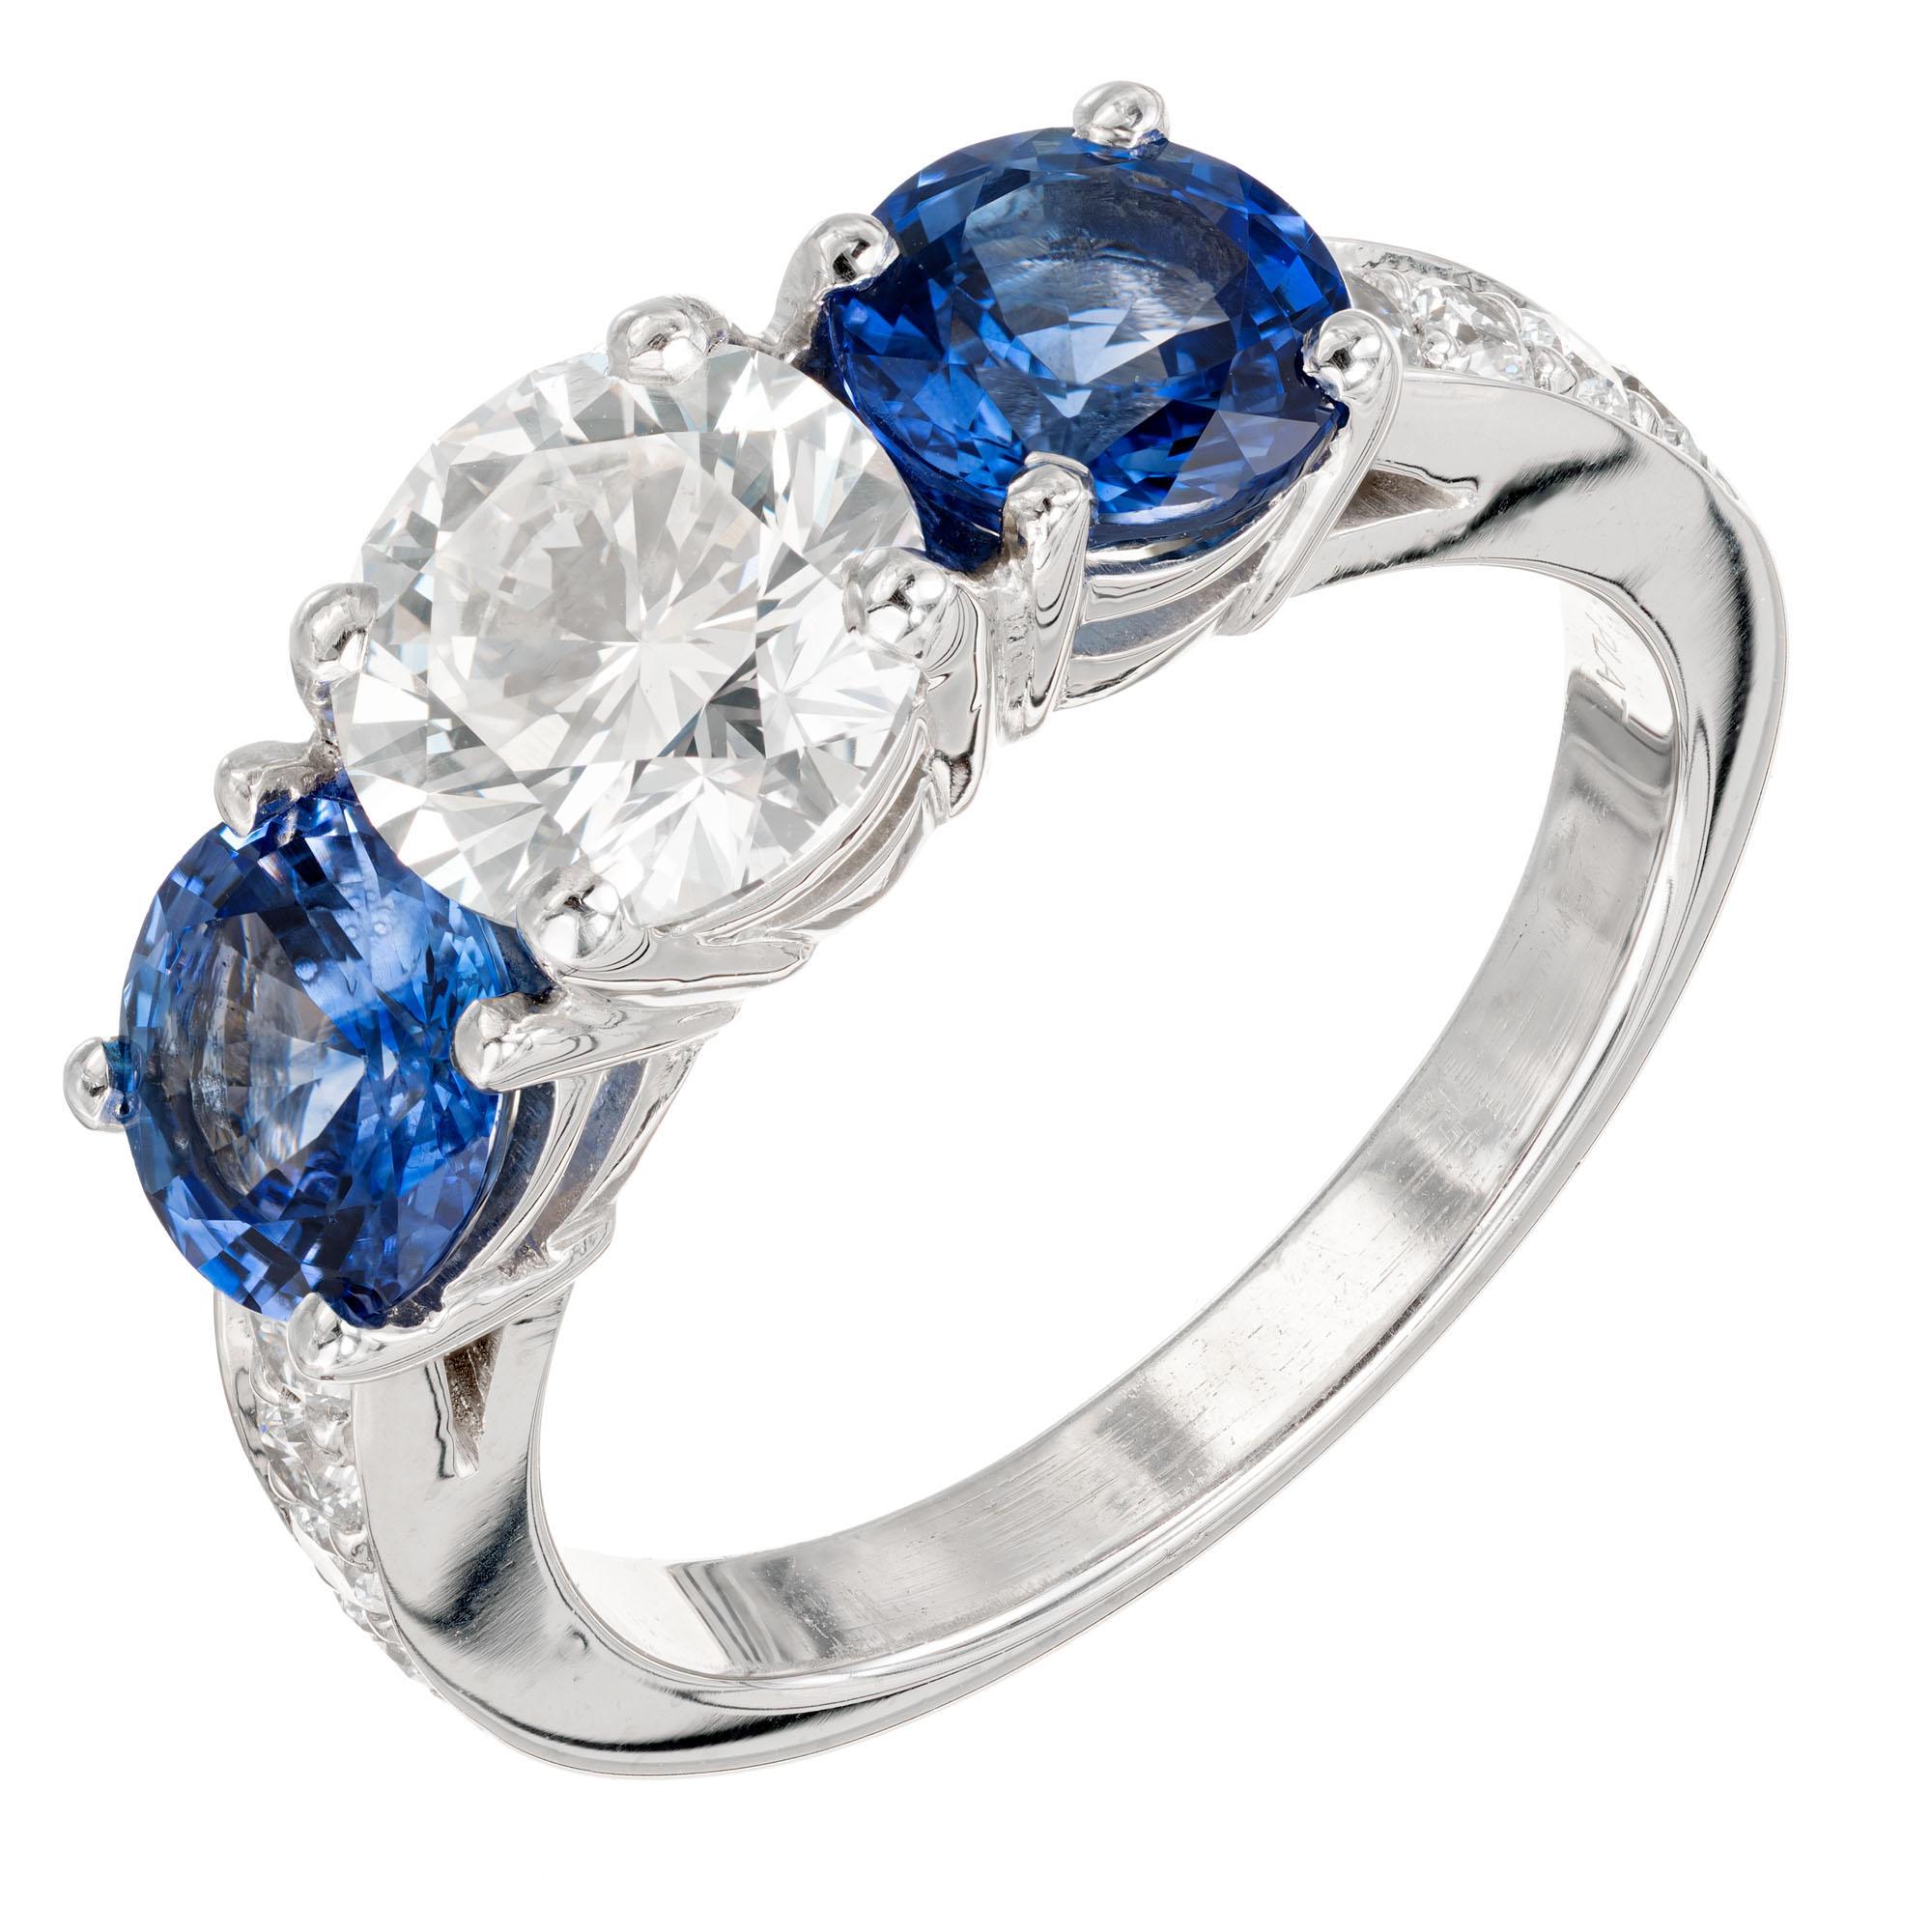 Peter Suchy diamond and sapphire three-stone engagement ring. Ideal cut 1.45 carat GIA certified diamond center stone with two round brilliant cut blue sapphires in a three-stone setting with round accent diamonds along both sides of the shank. The